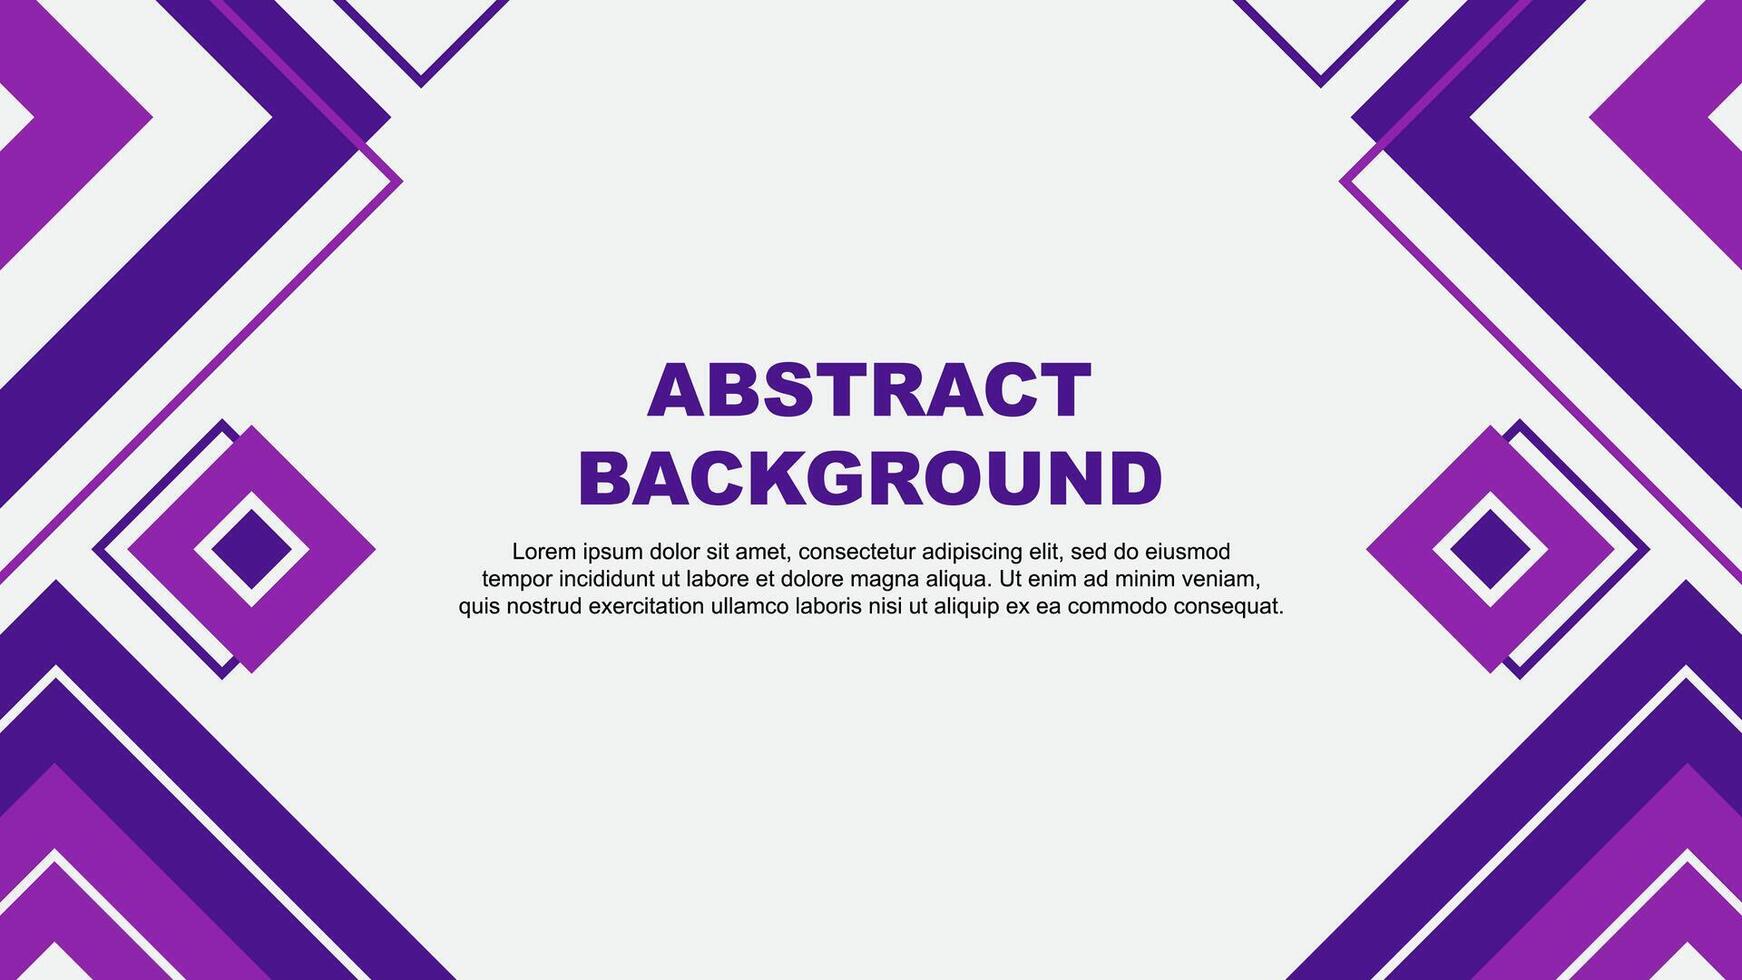 Abstract Purple Background Design Template. Abstract Banner Wallpaper Illustration. Purple Background vector